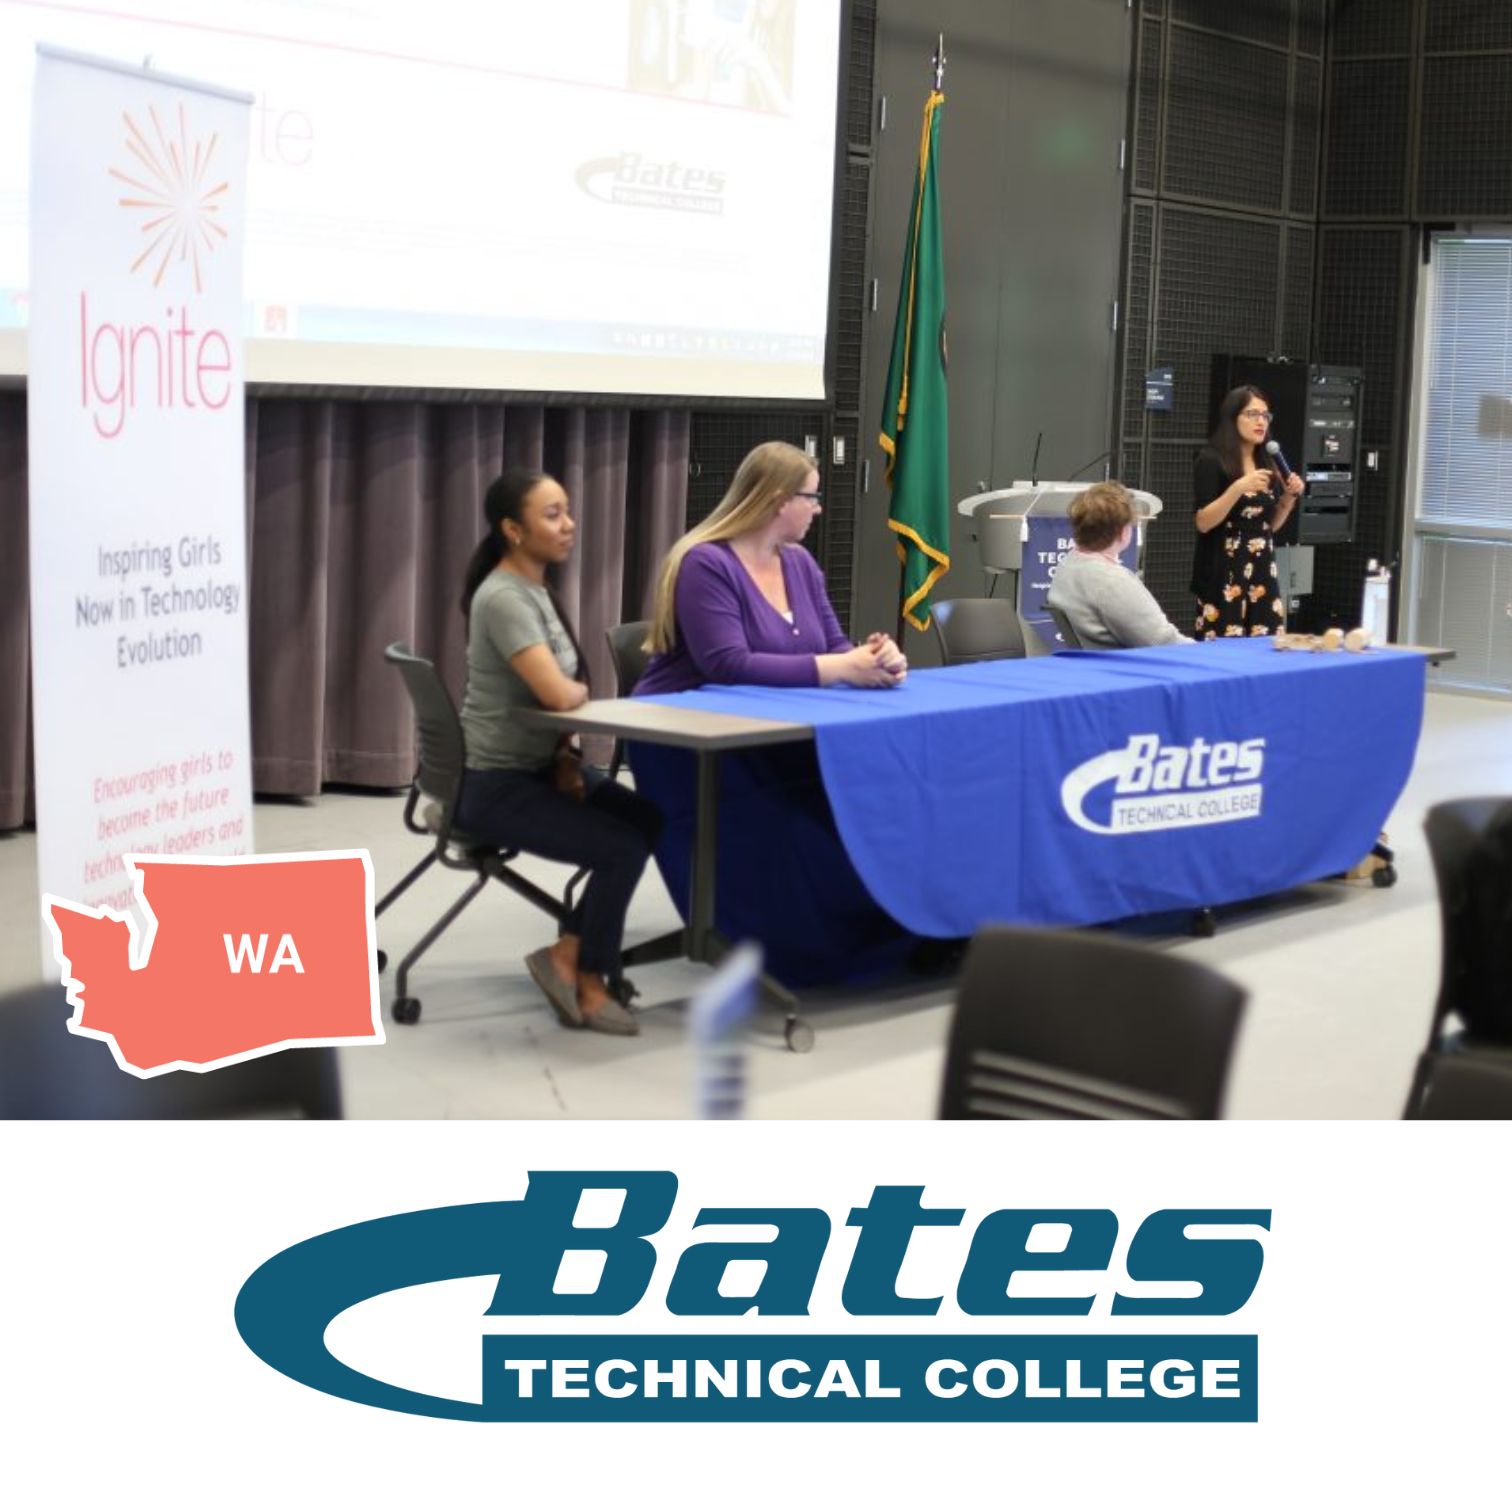 ignite-stem-conference-at-bates-technical-college-tacoma-high-school-ignite-worldwide